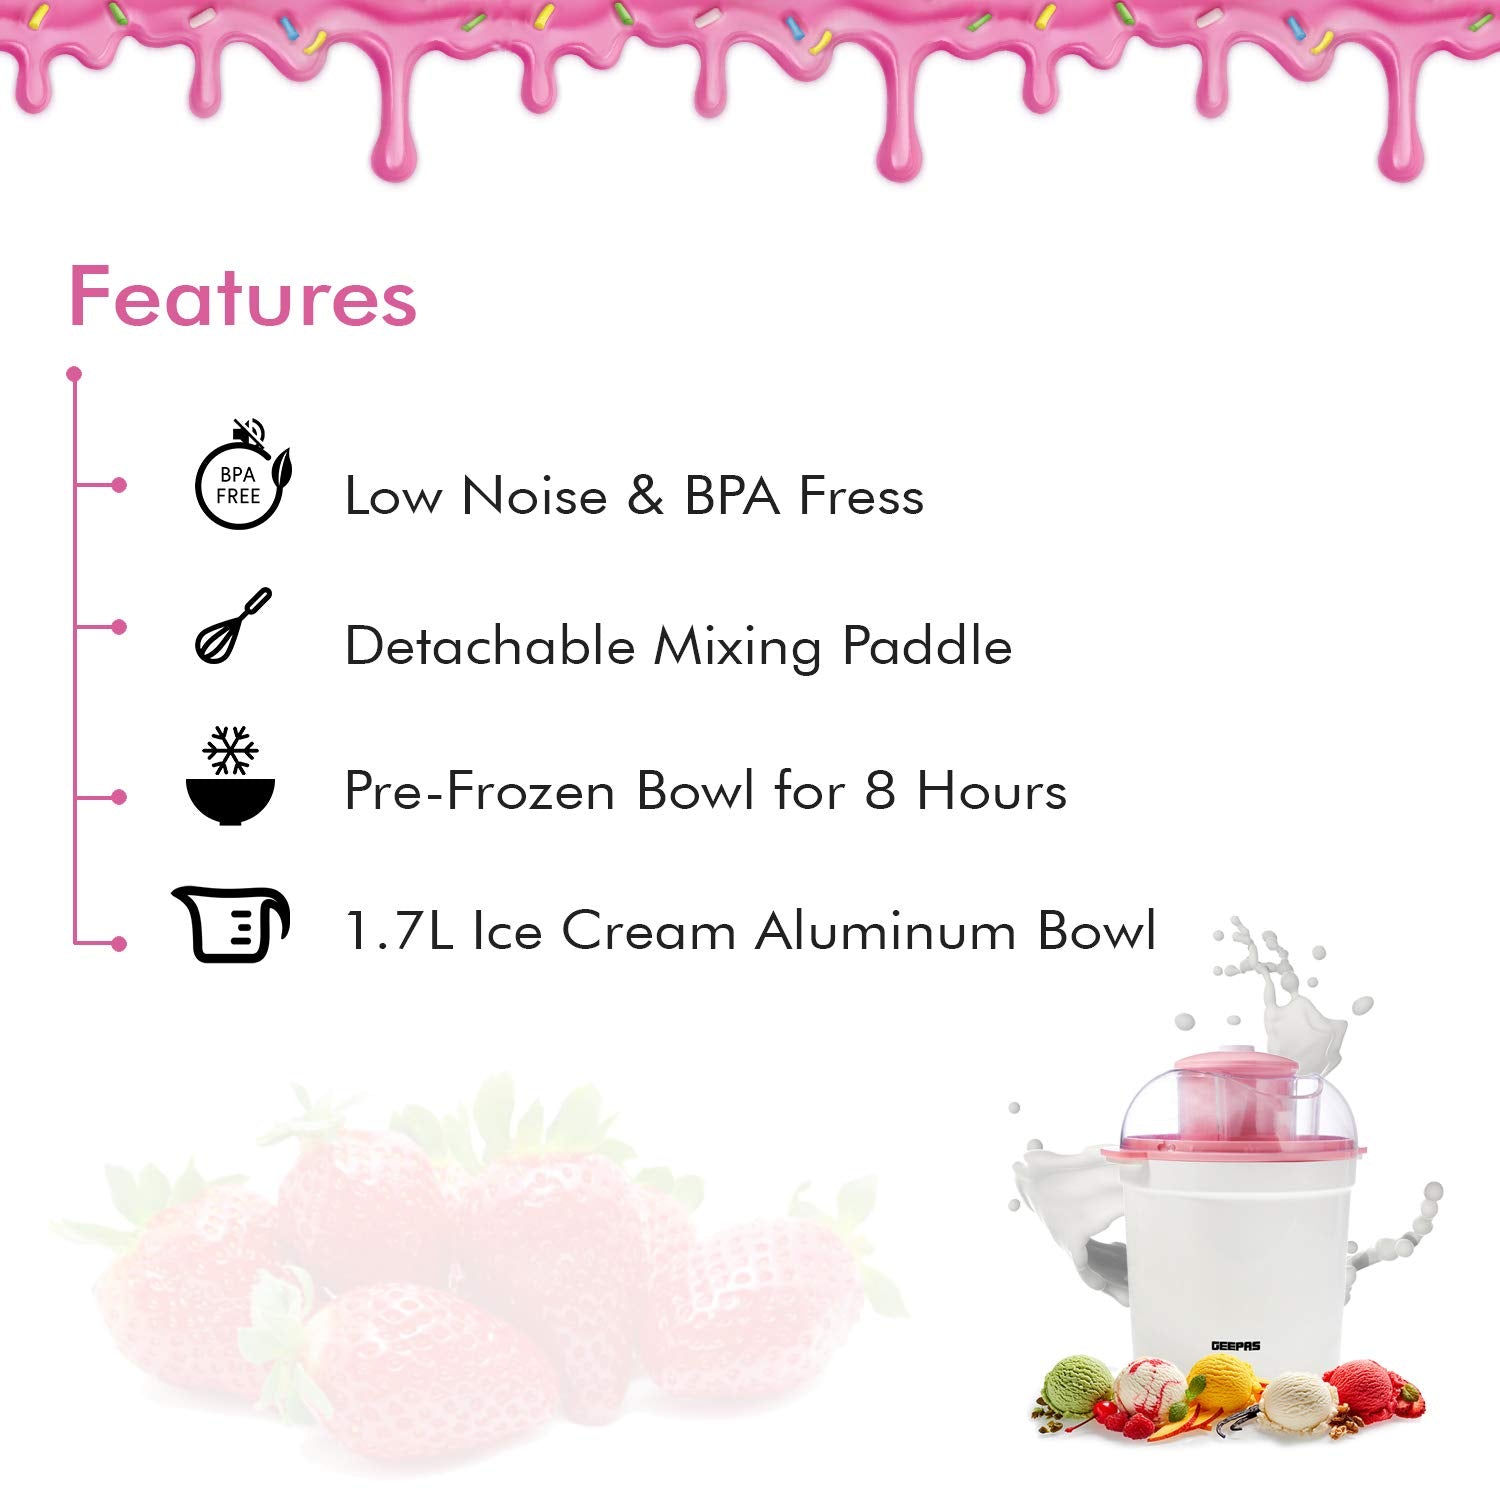 Geepas Ice Cream Maker Machine Makes Delicious Homemade Soft Ice Cream, Gelato, Frozen Yoghurt & Sorbet |1.7L Aluminum Removable Inner Bowl | Detachable Mixing Paddle | 1 Year Warranty